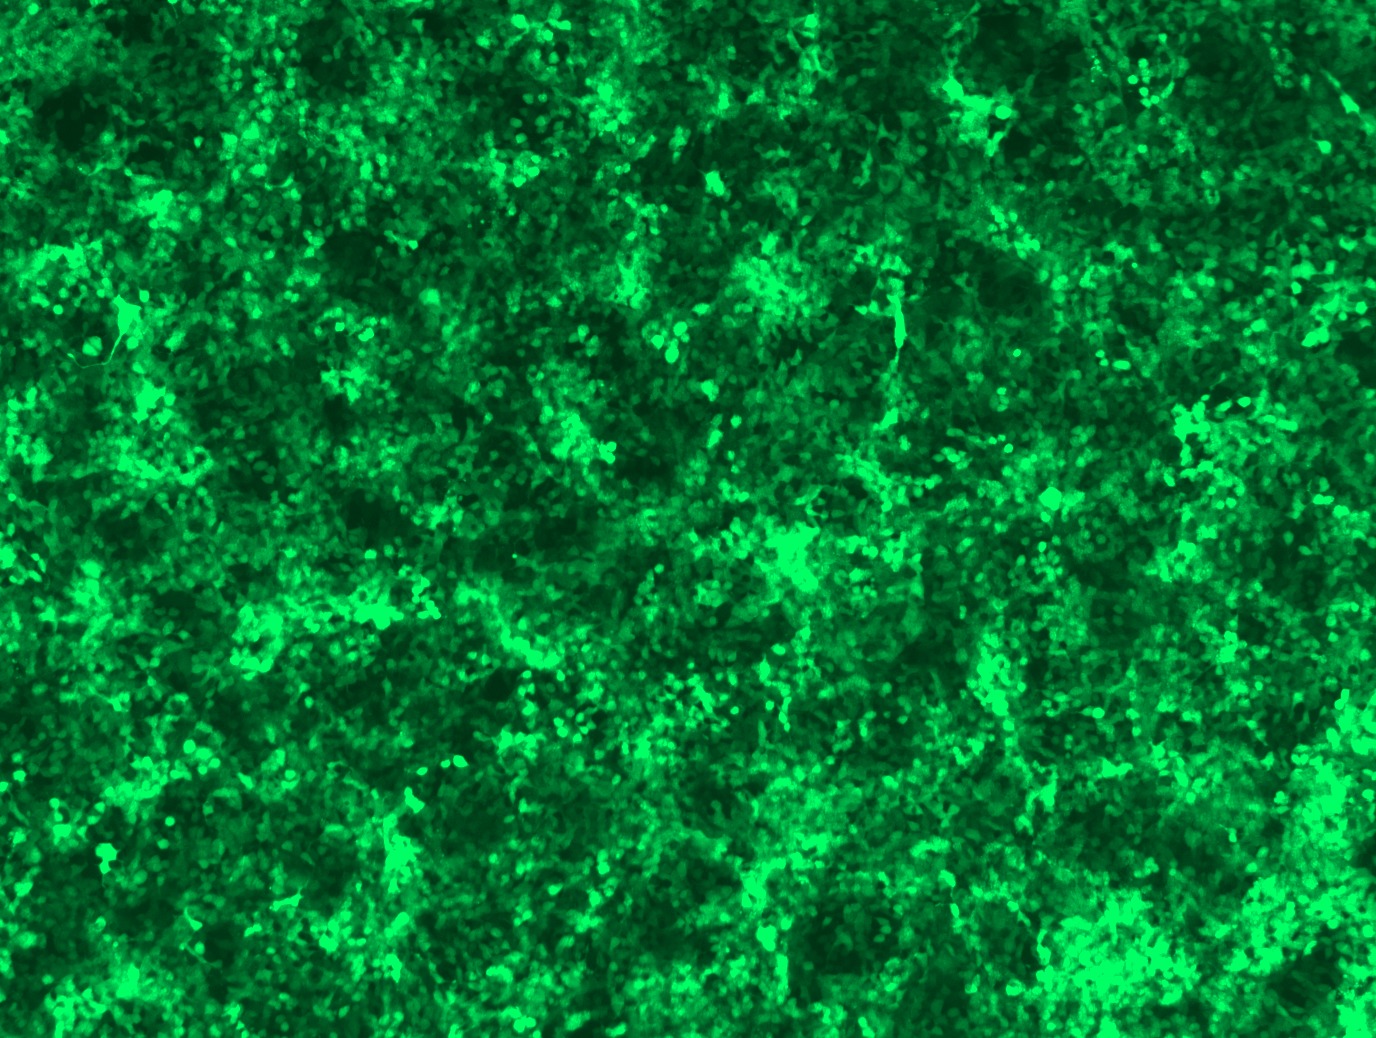 GFP signal was observed under microscope at 48 hours after transduction of TL306029A virus into HEK293 cells. TL306029A virus was prepared using lenti-shRNA TL306029A and TR30037 packaging kit.